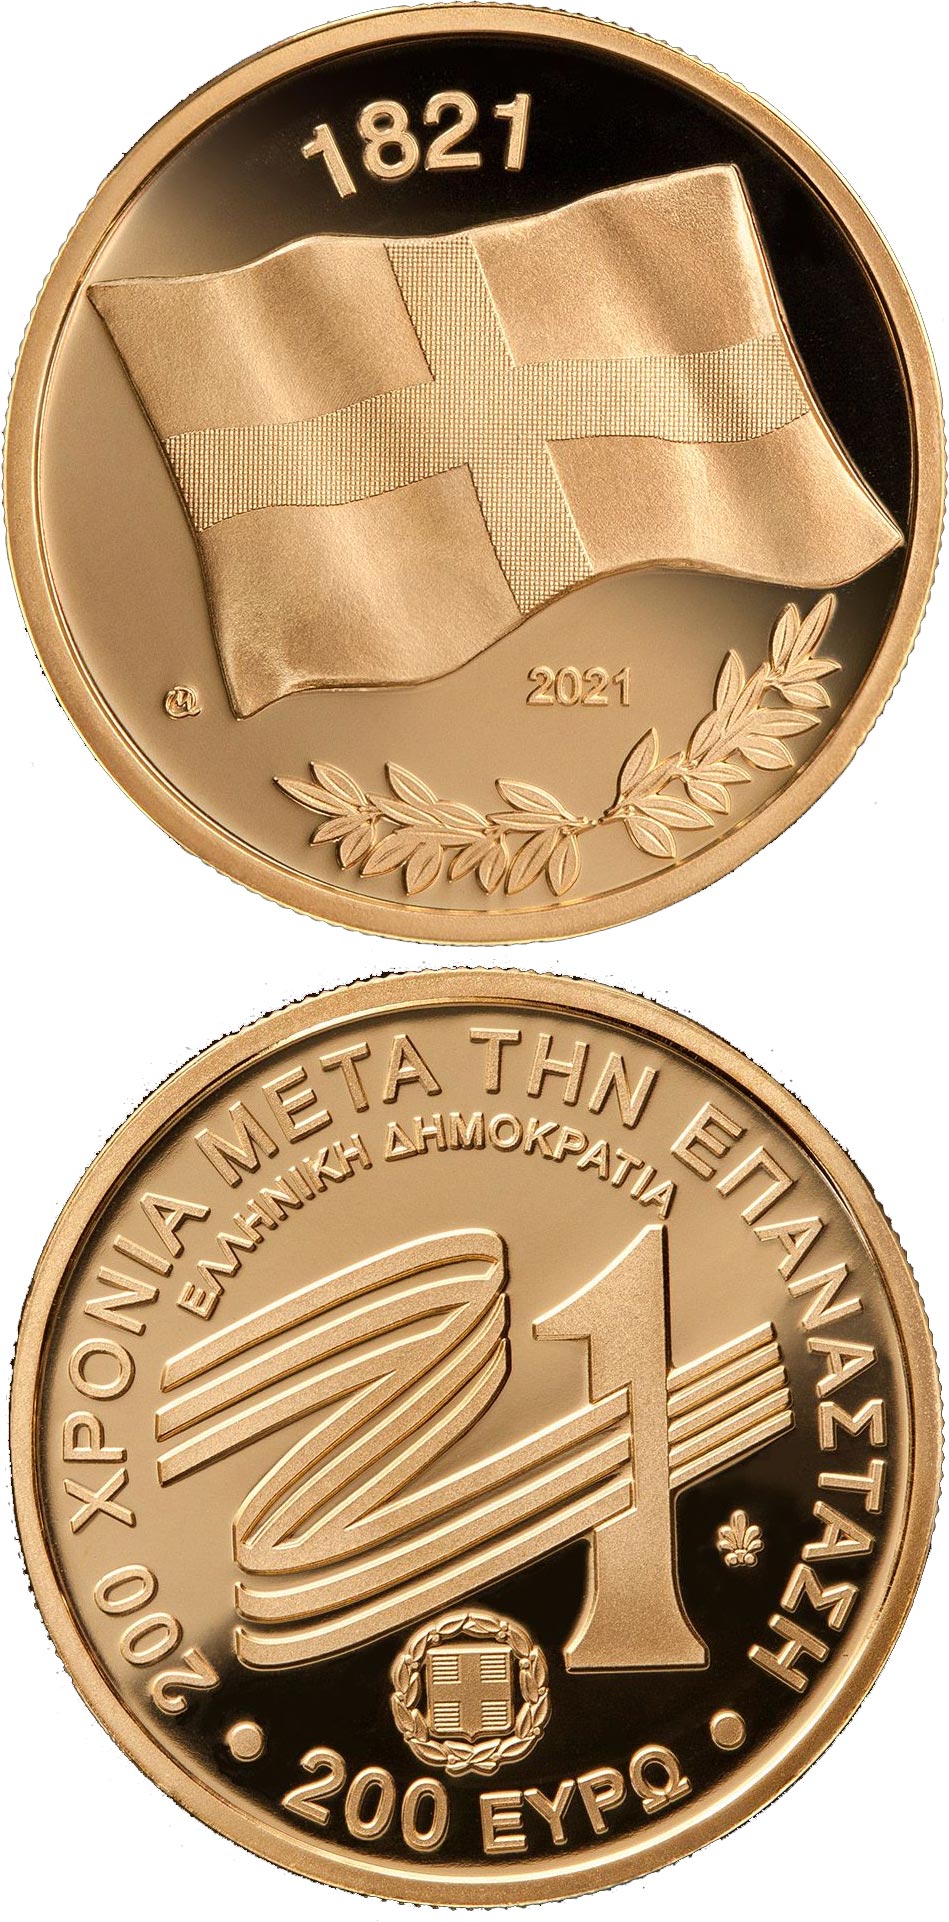 Image of 200 euro coin - The Flags of Greece - Greek Flag of 1821 | Greece 2021.  The Gold coin is of Proof quality.